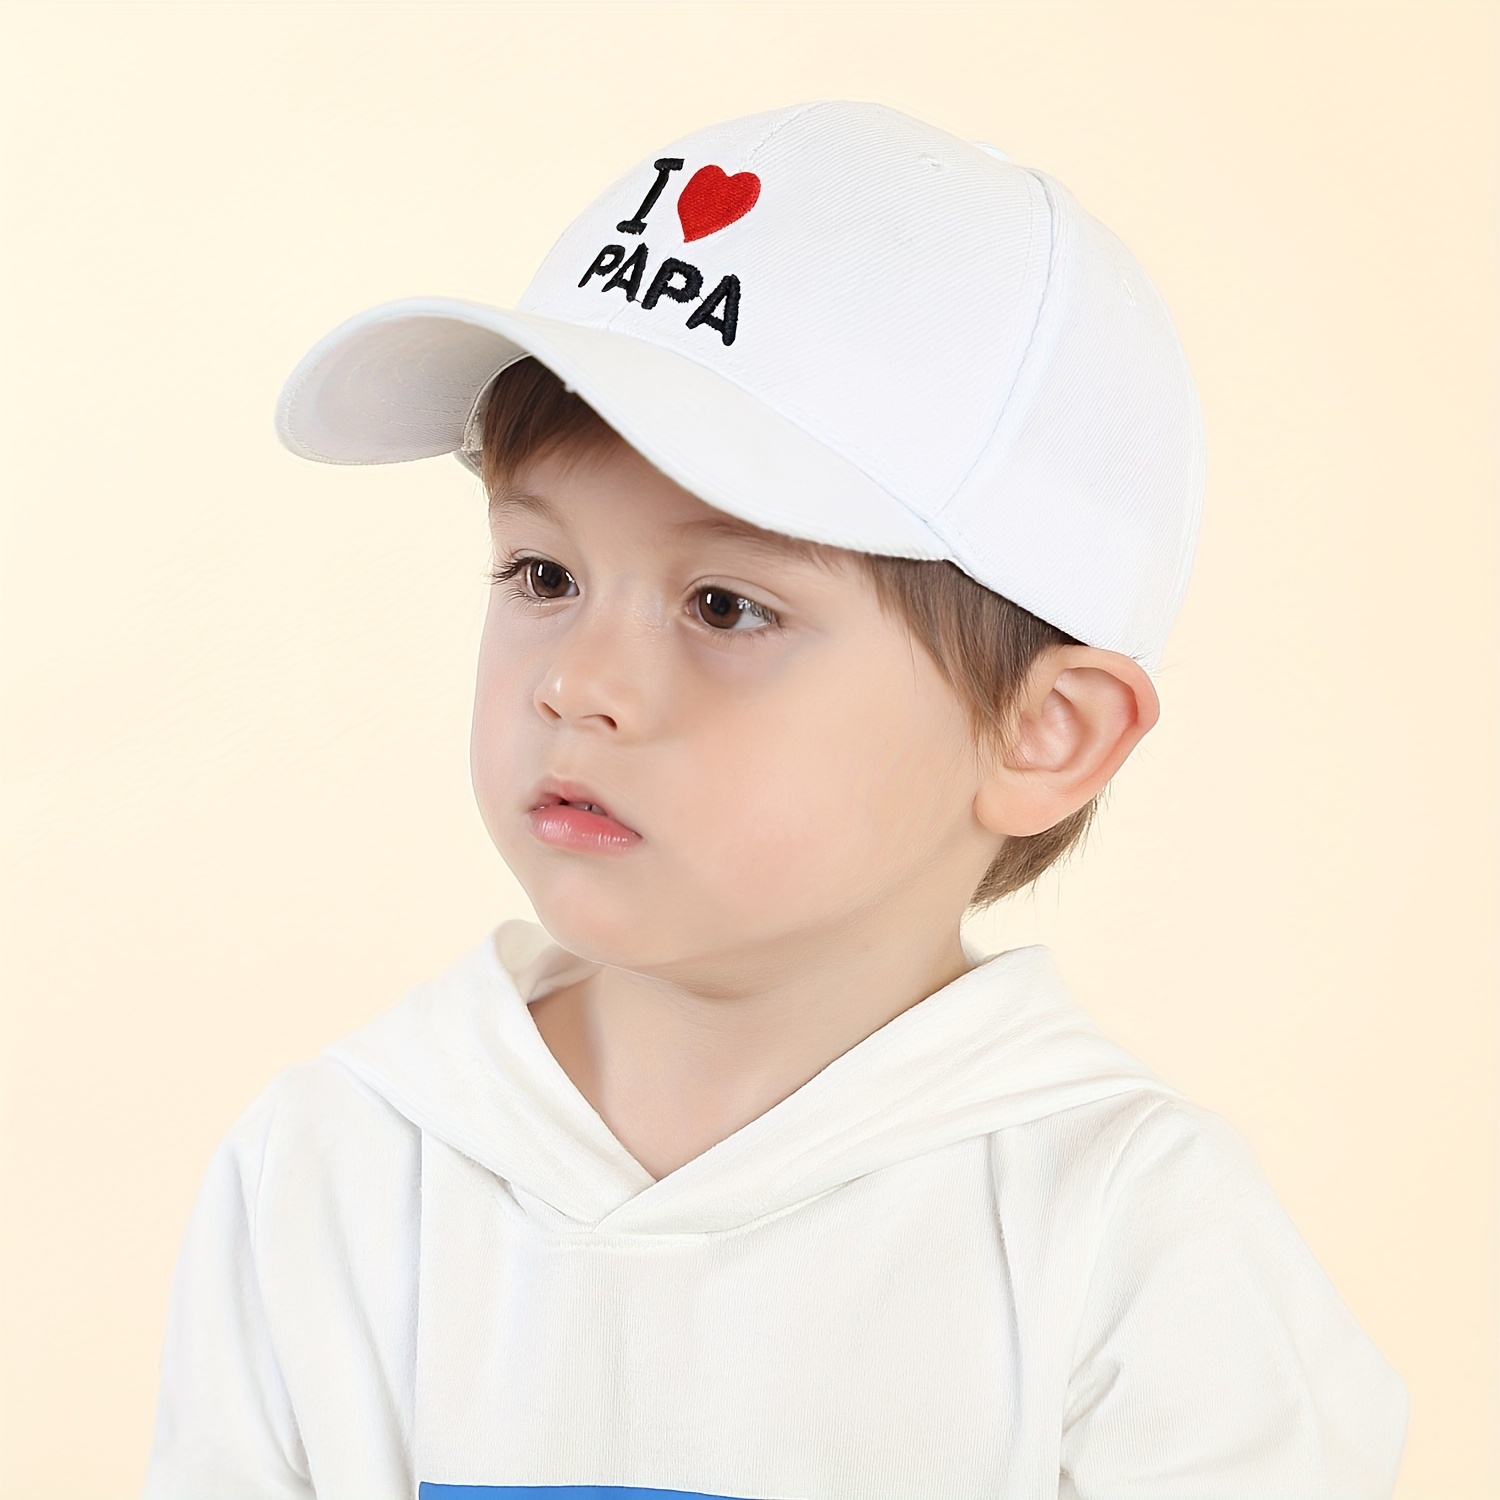 Kids I Love Papa Embroidered Adjustable Baseball Cap, Breathable Sun  Screen Sport Hat For Outdoor Hiking Beach Children Toddlers Boys Girls